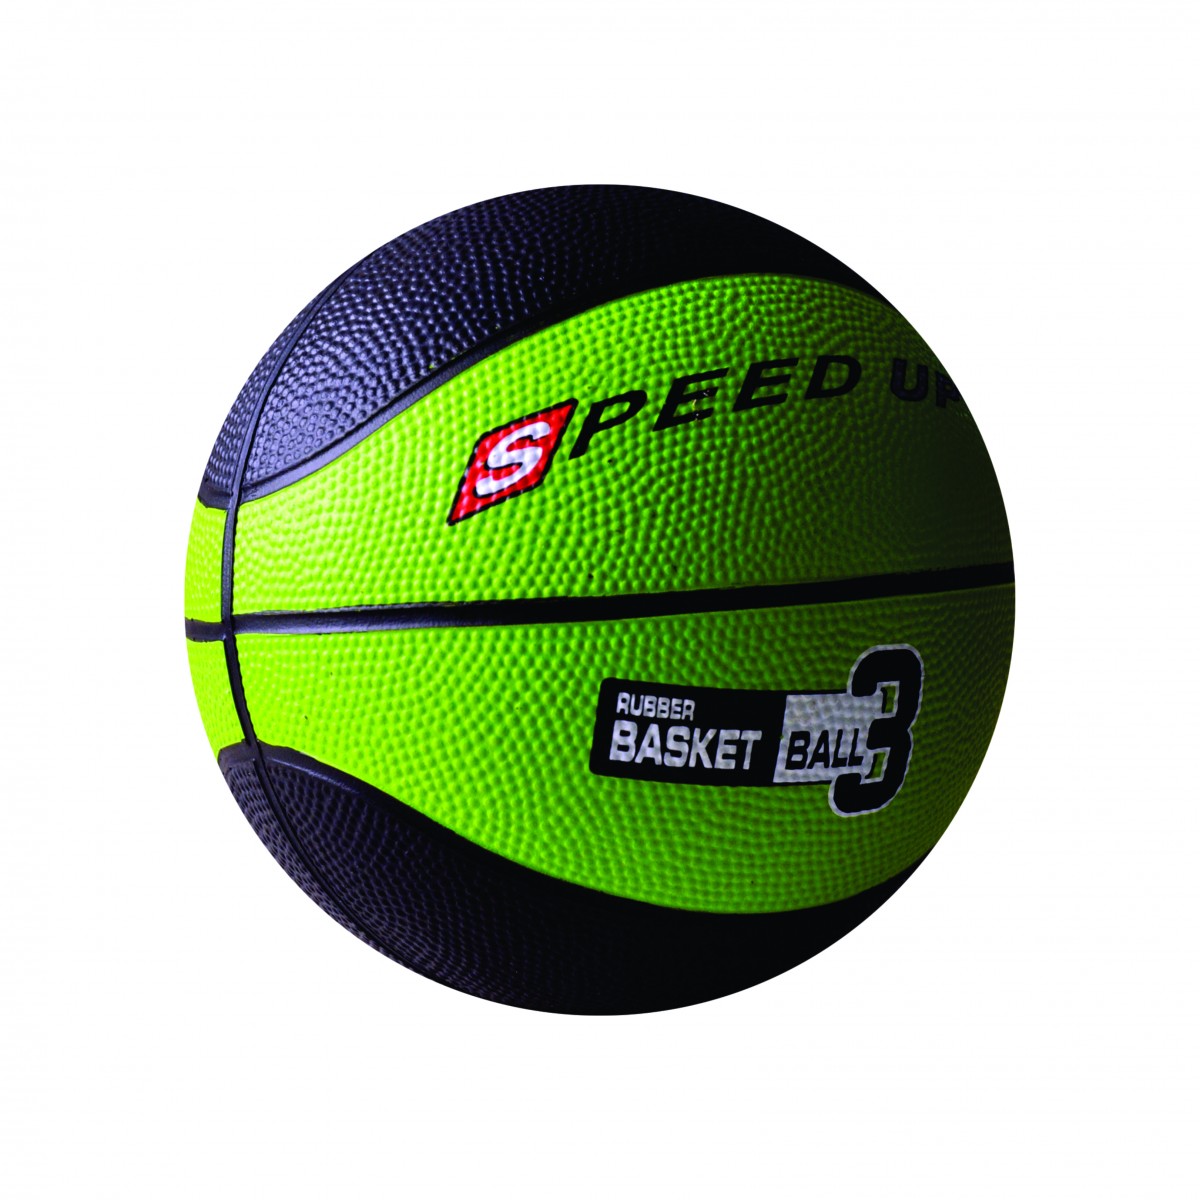 Speed Up Basketball, Basket Ball for Indoor-Outdoor Training Basketball, Multicolour 8Y+